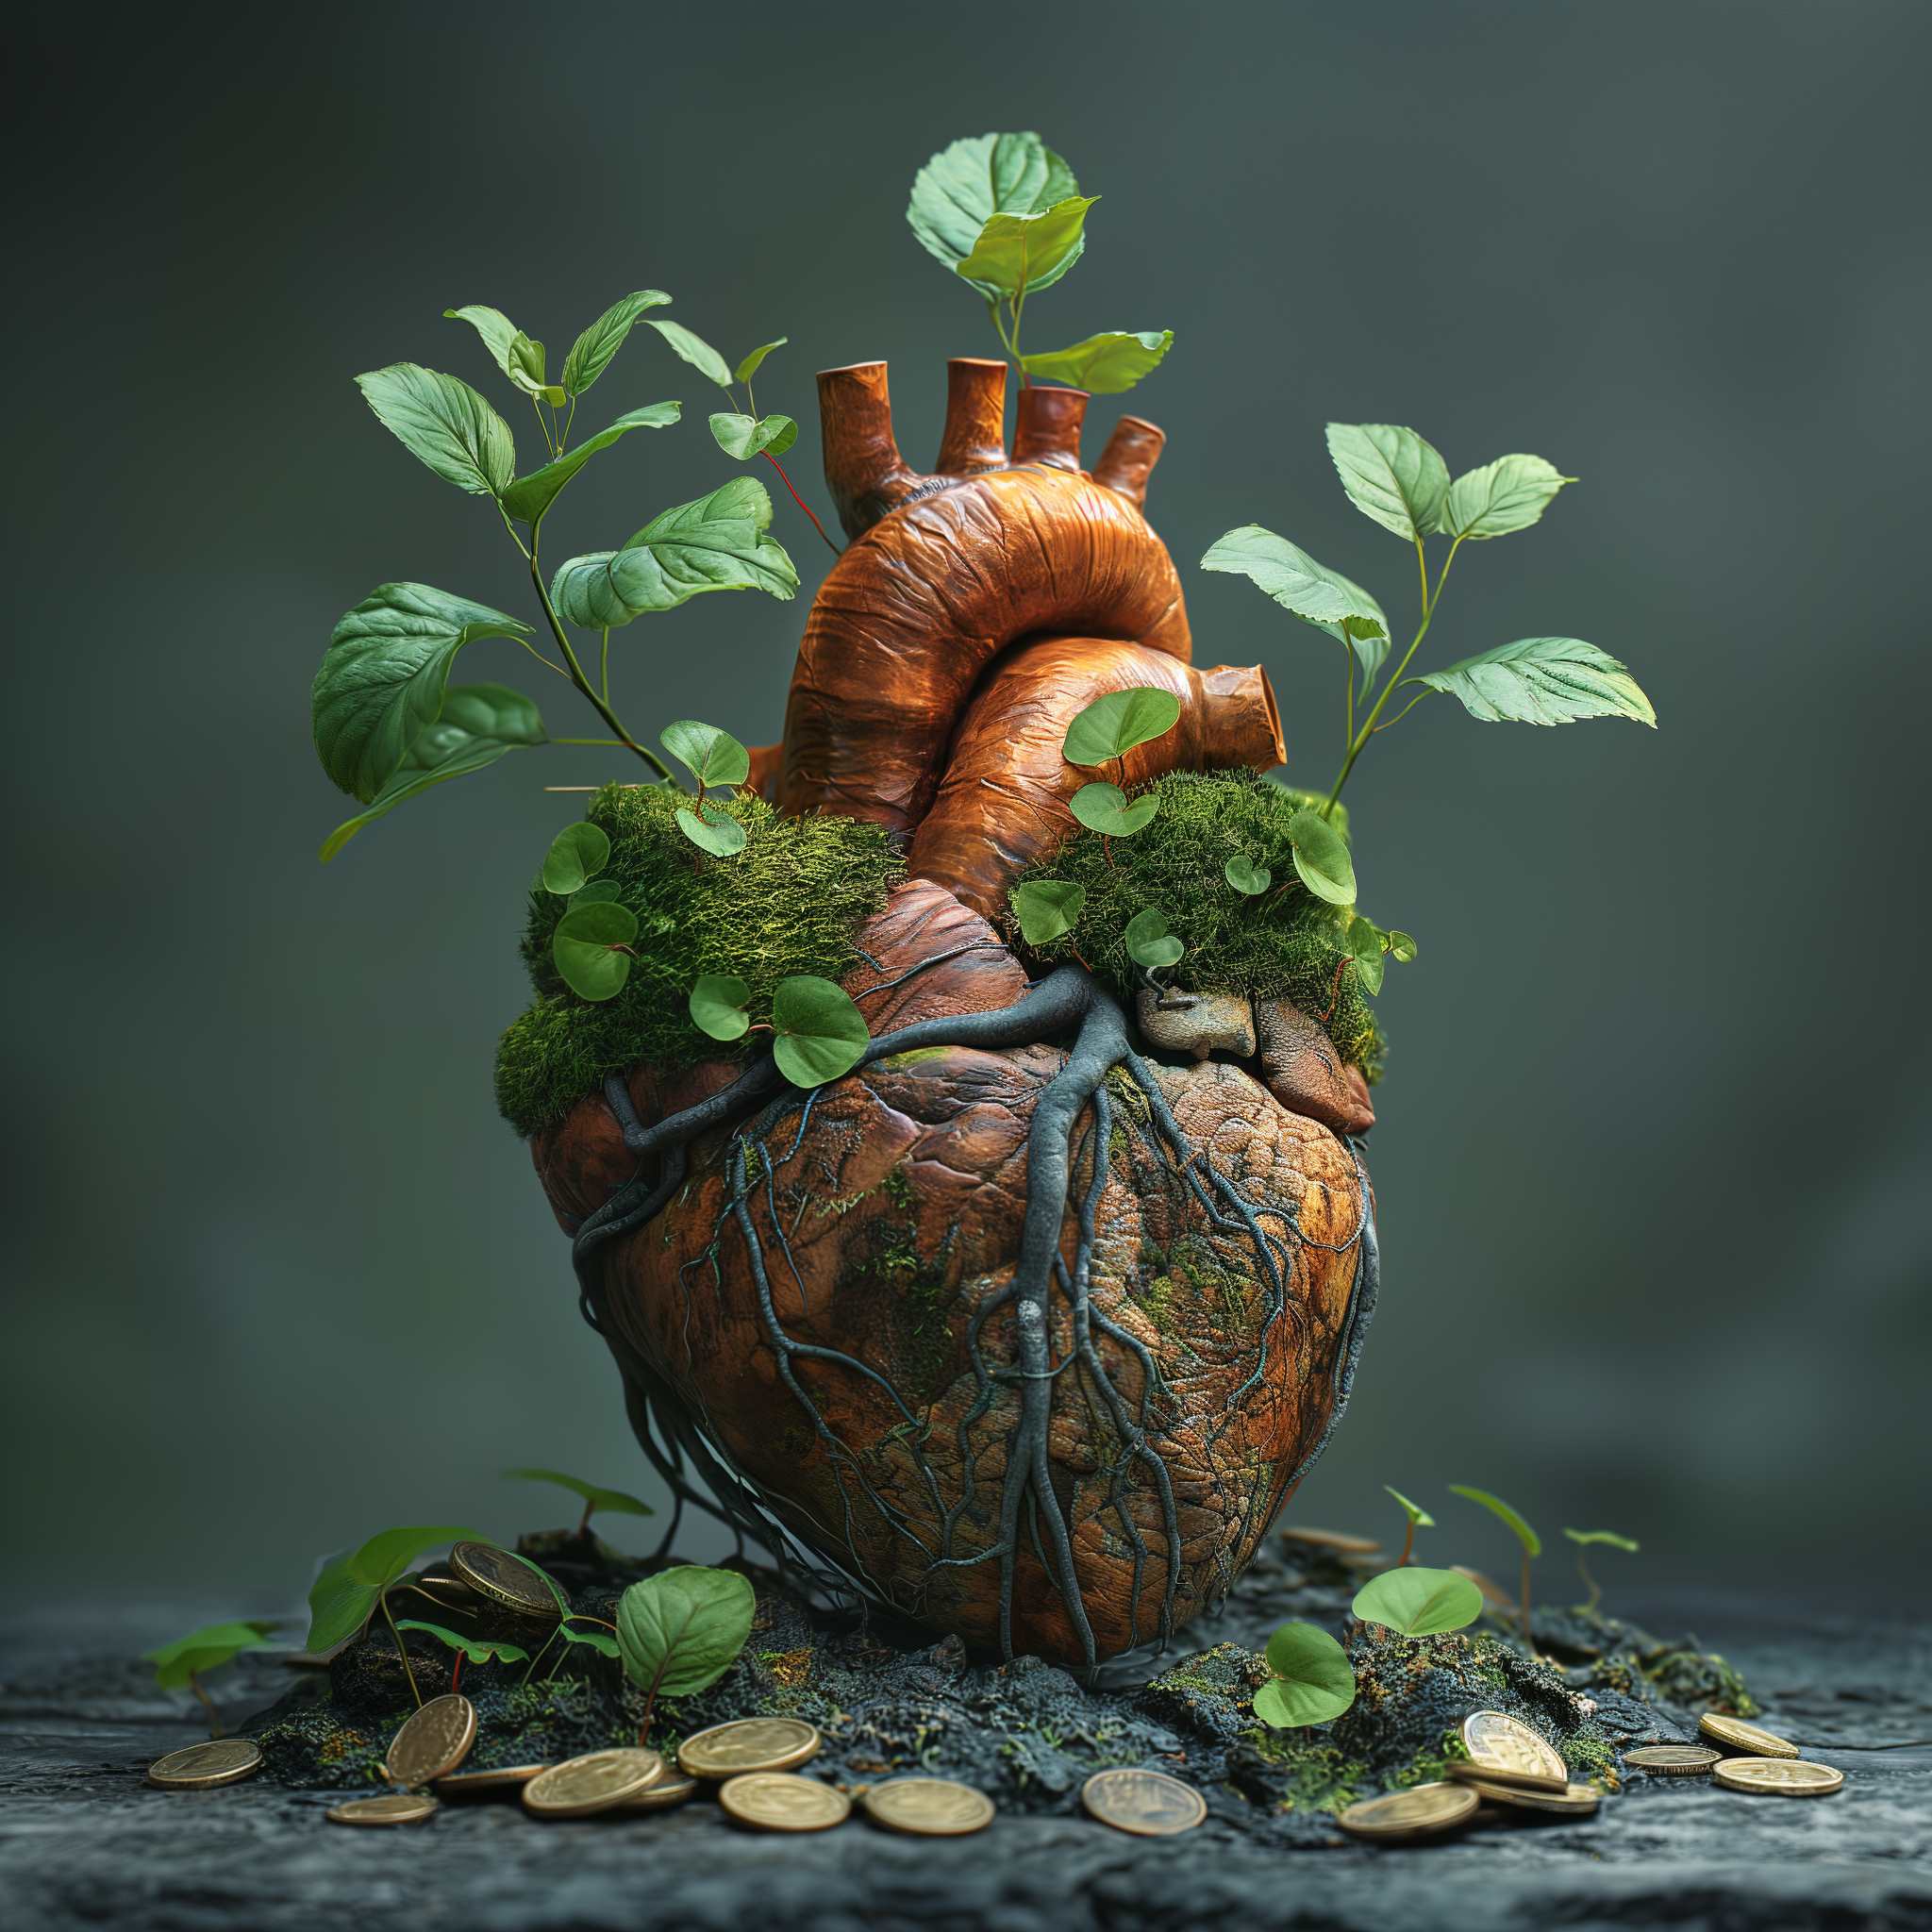 A conceptual image of a human heart transformed into a flourishing, supportive tree, with roots extending out and coins scattered at the base, symbolizing the interconnection of life, growth, and perhaps the value